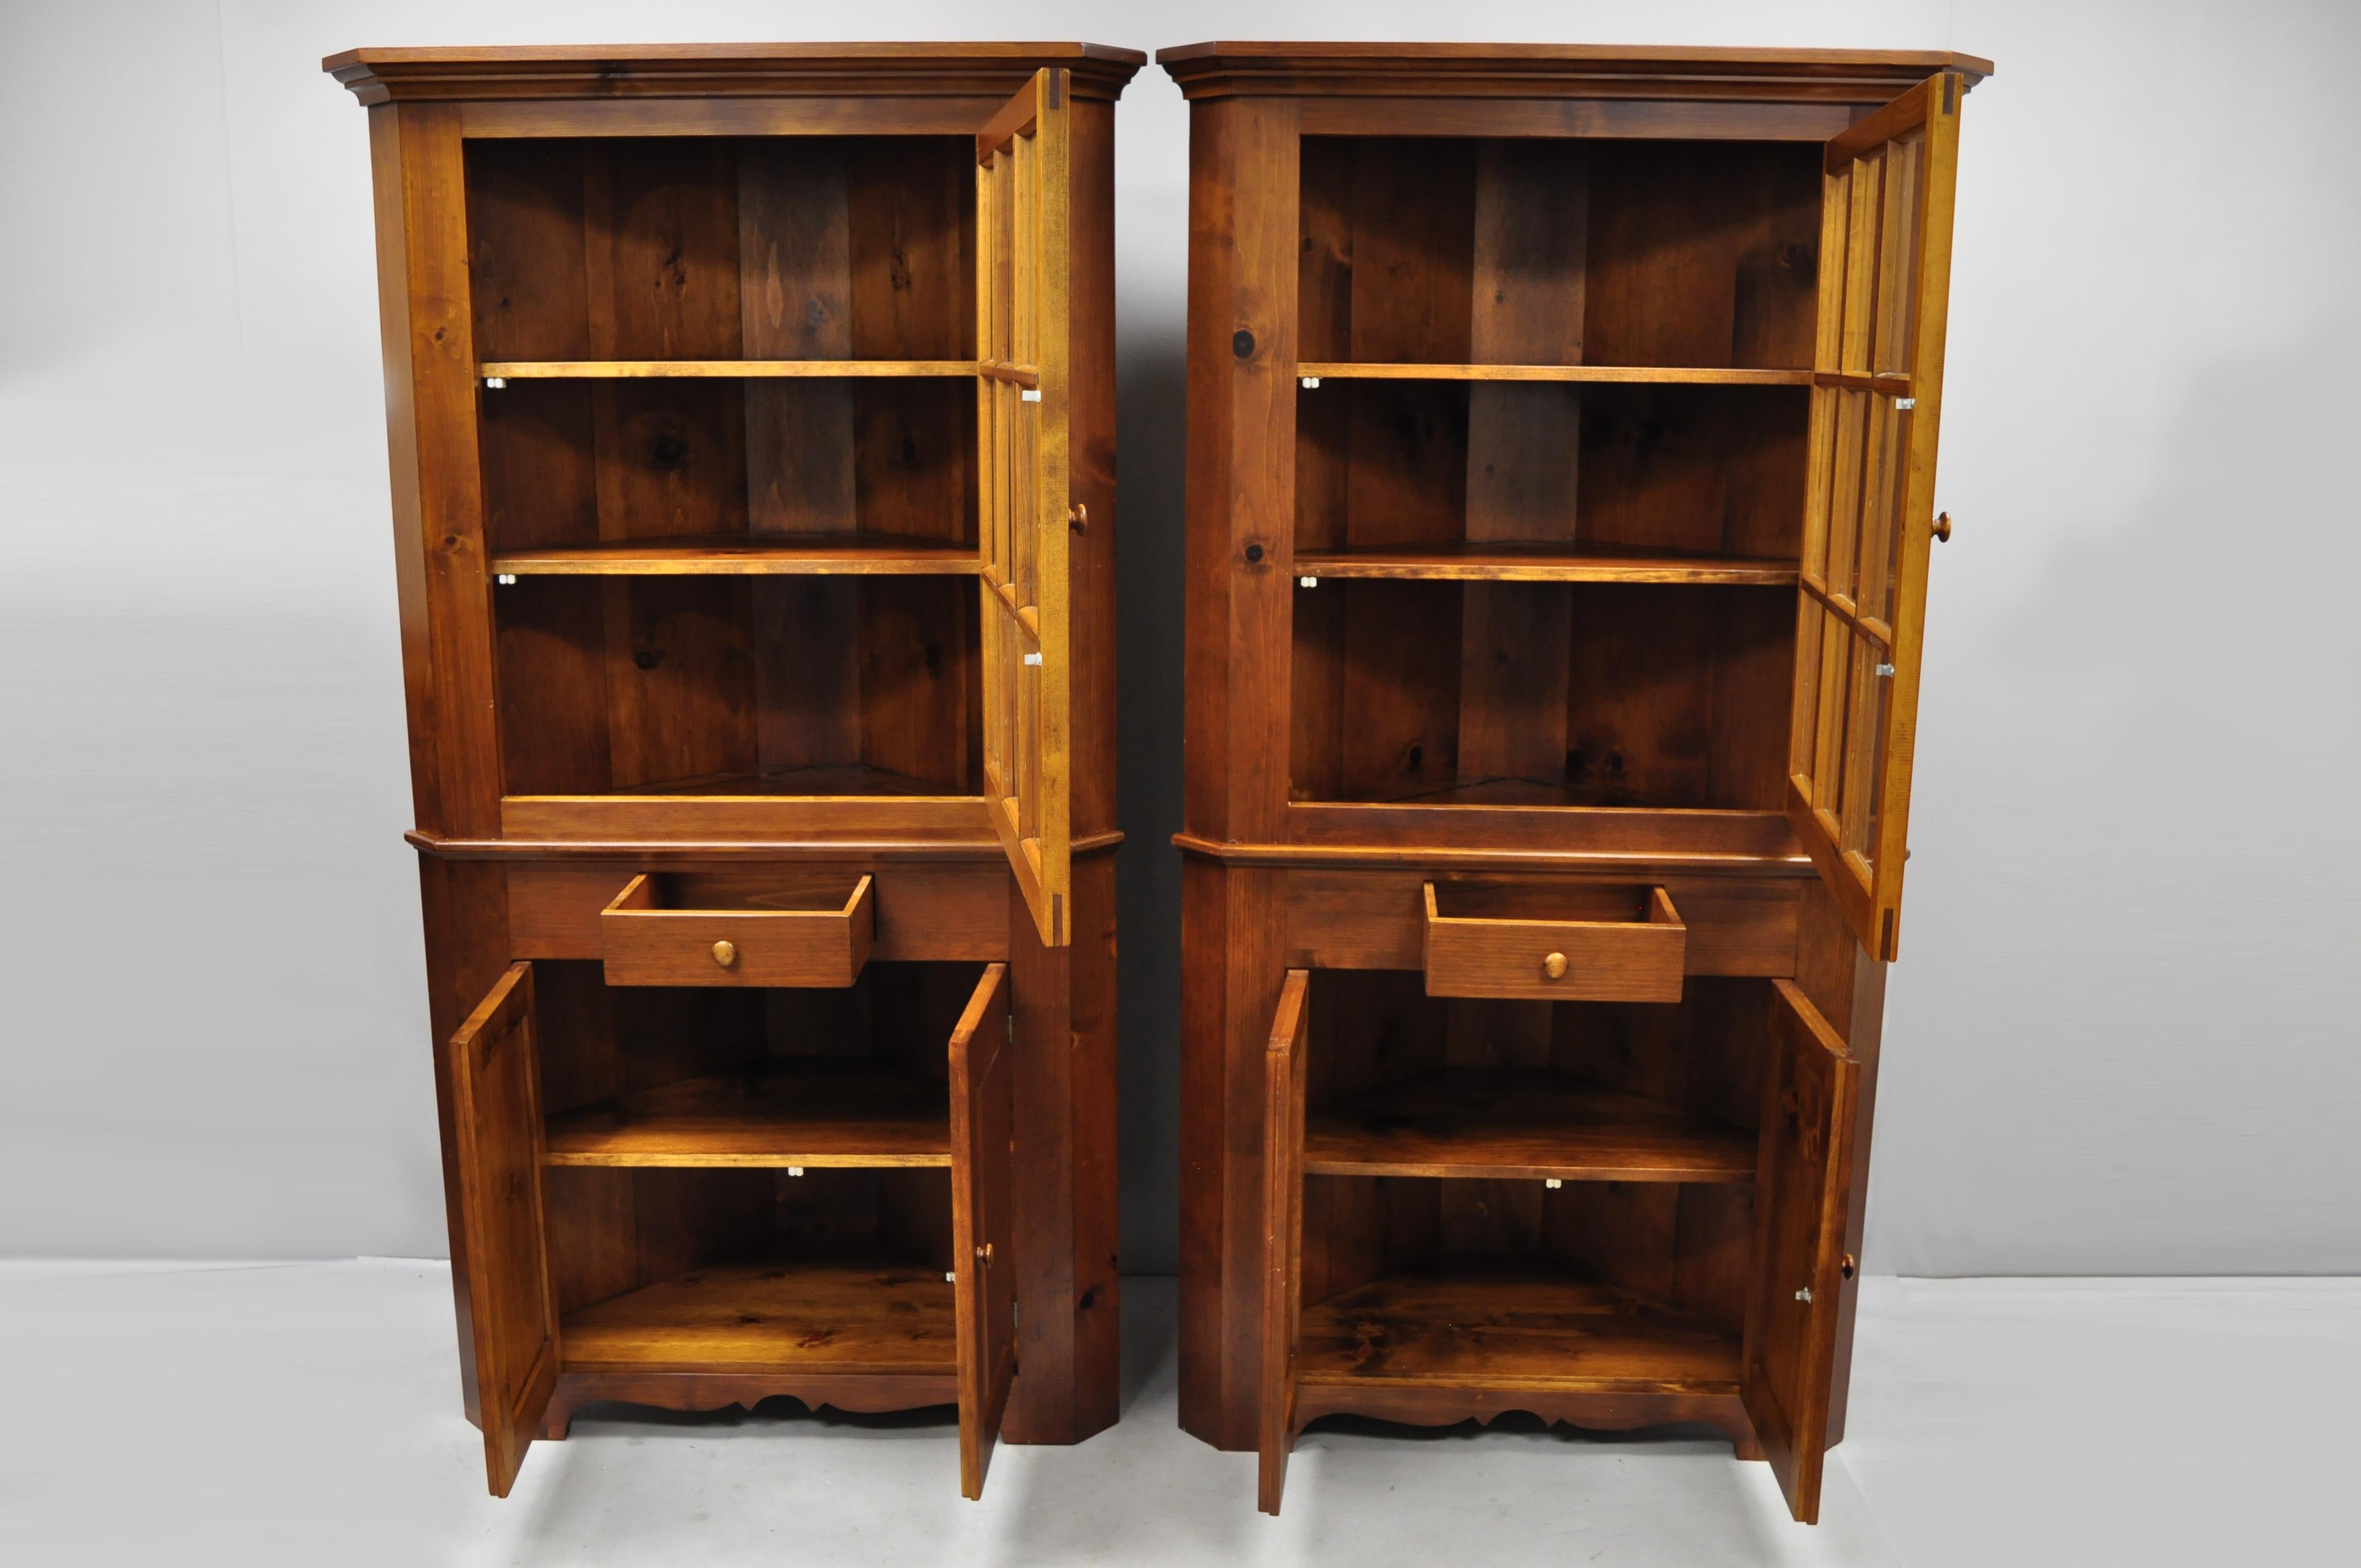 British Colonial Pair of Pine Wood Colonial Style Corner Cupboard China Cabinets by Tom Seely